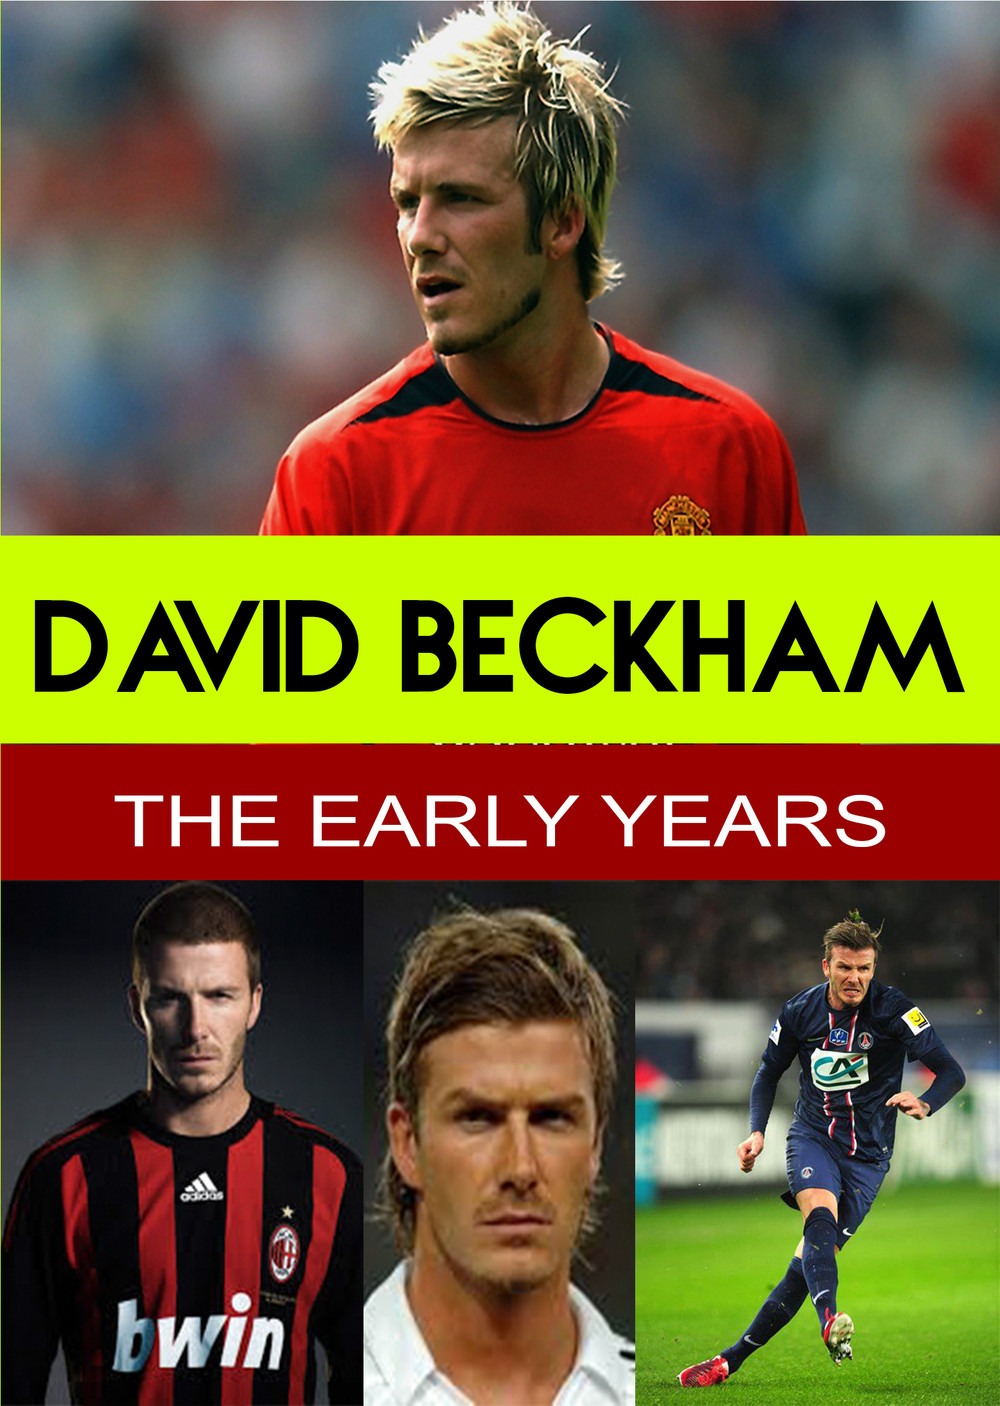 L7813 - David Beckham - The Early Years